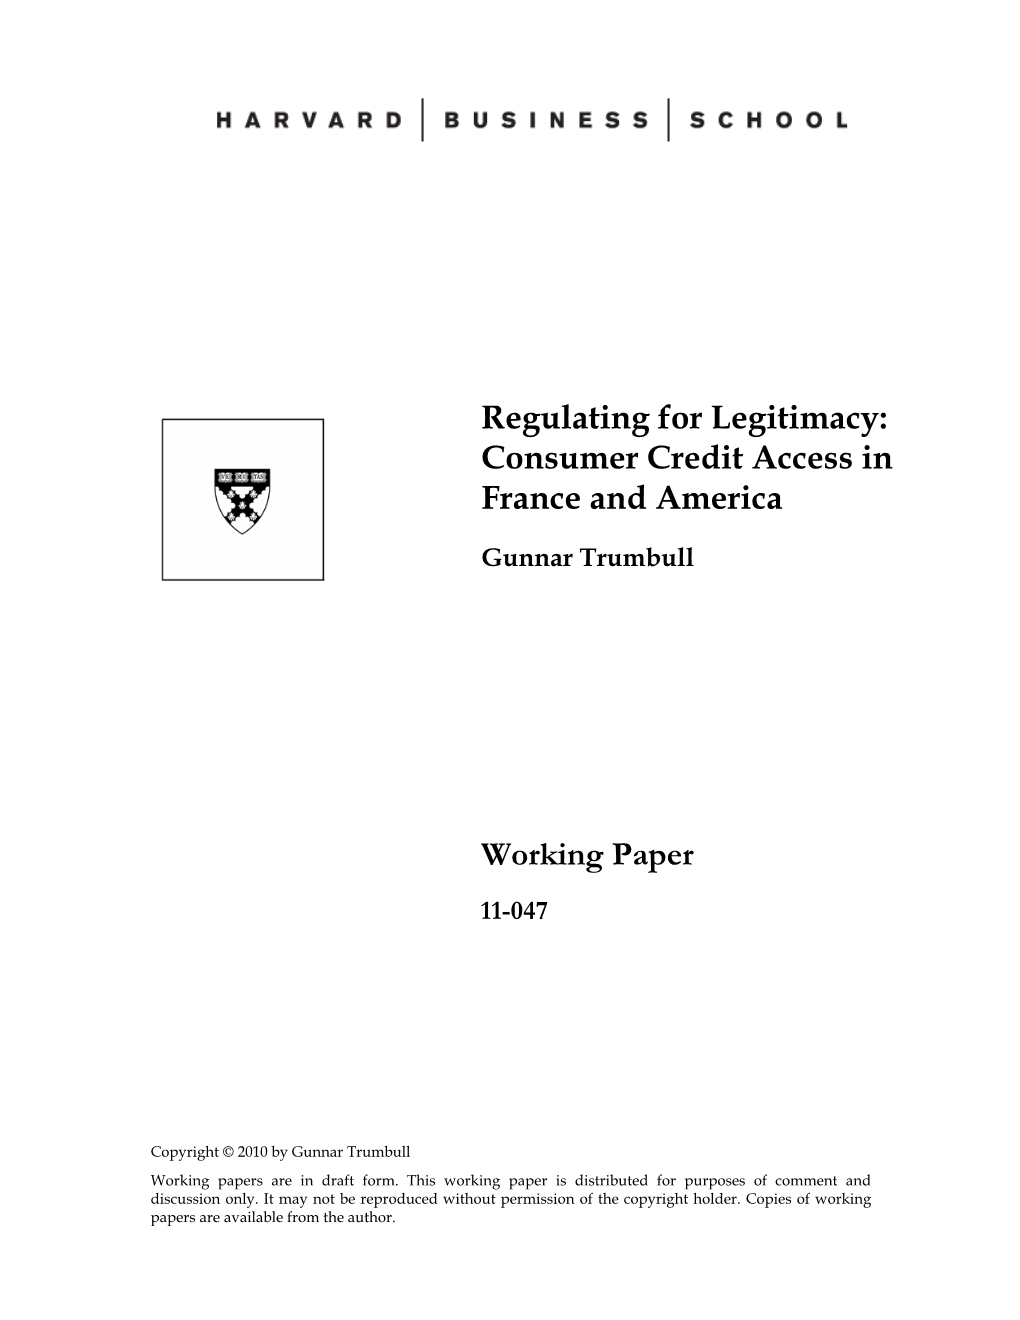 Consumer Credit Access in France and America Working Paper